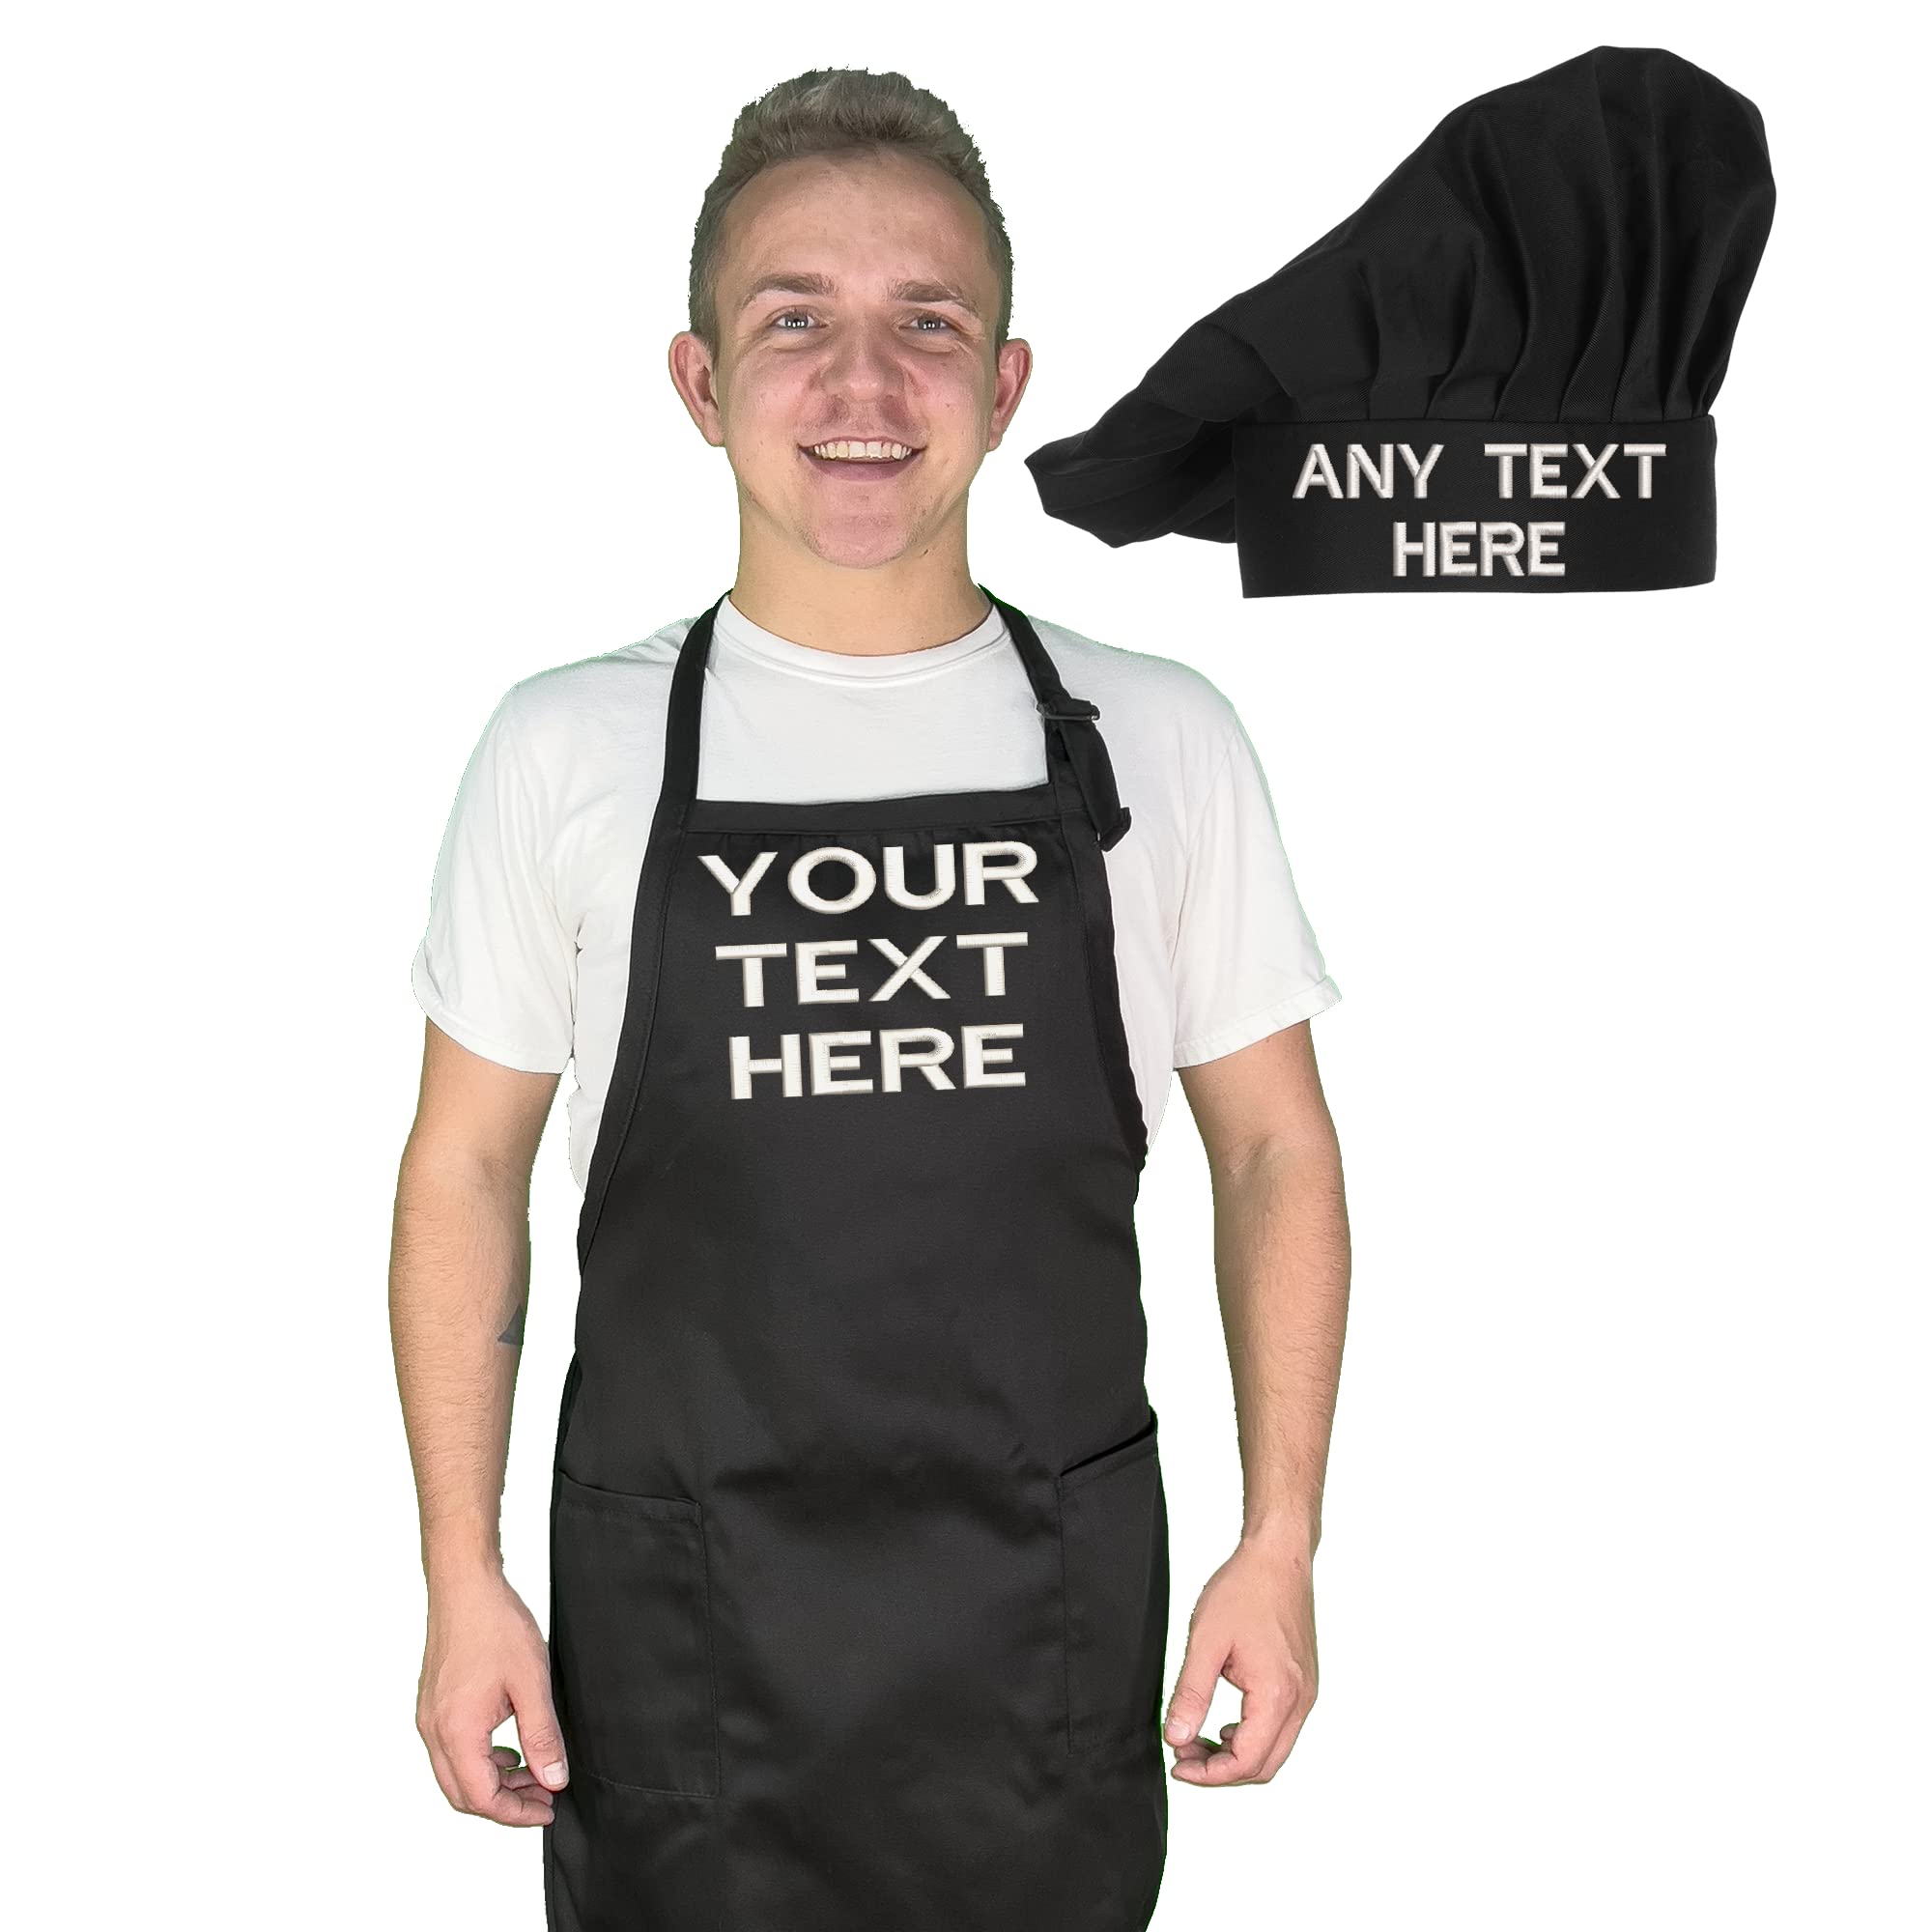 Personalized Chef Apron with Hat Set for chef Embroidered Design - Aprons for Women and Men, Kitchen Chef Apron with 2 Pockets and 40